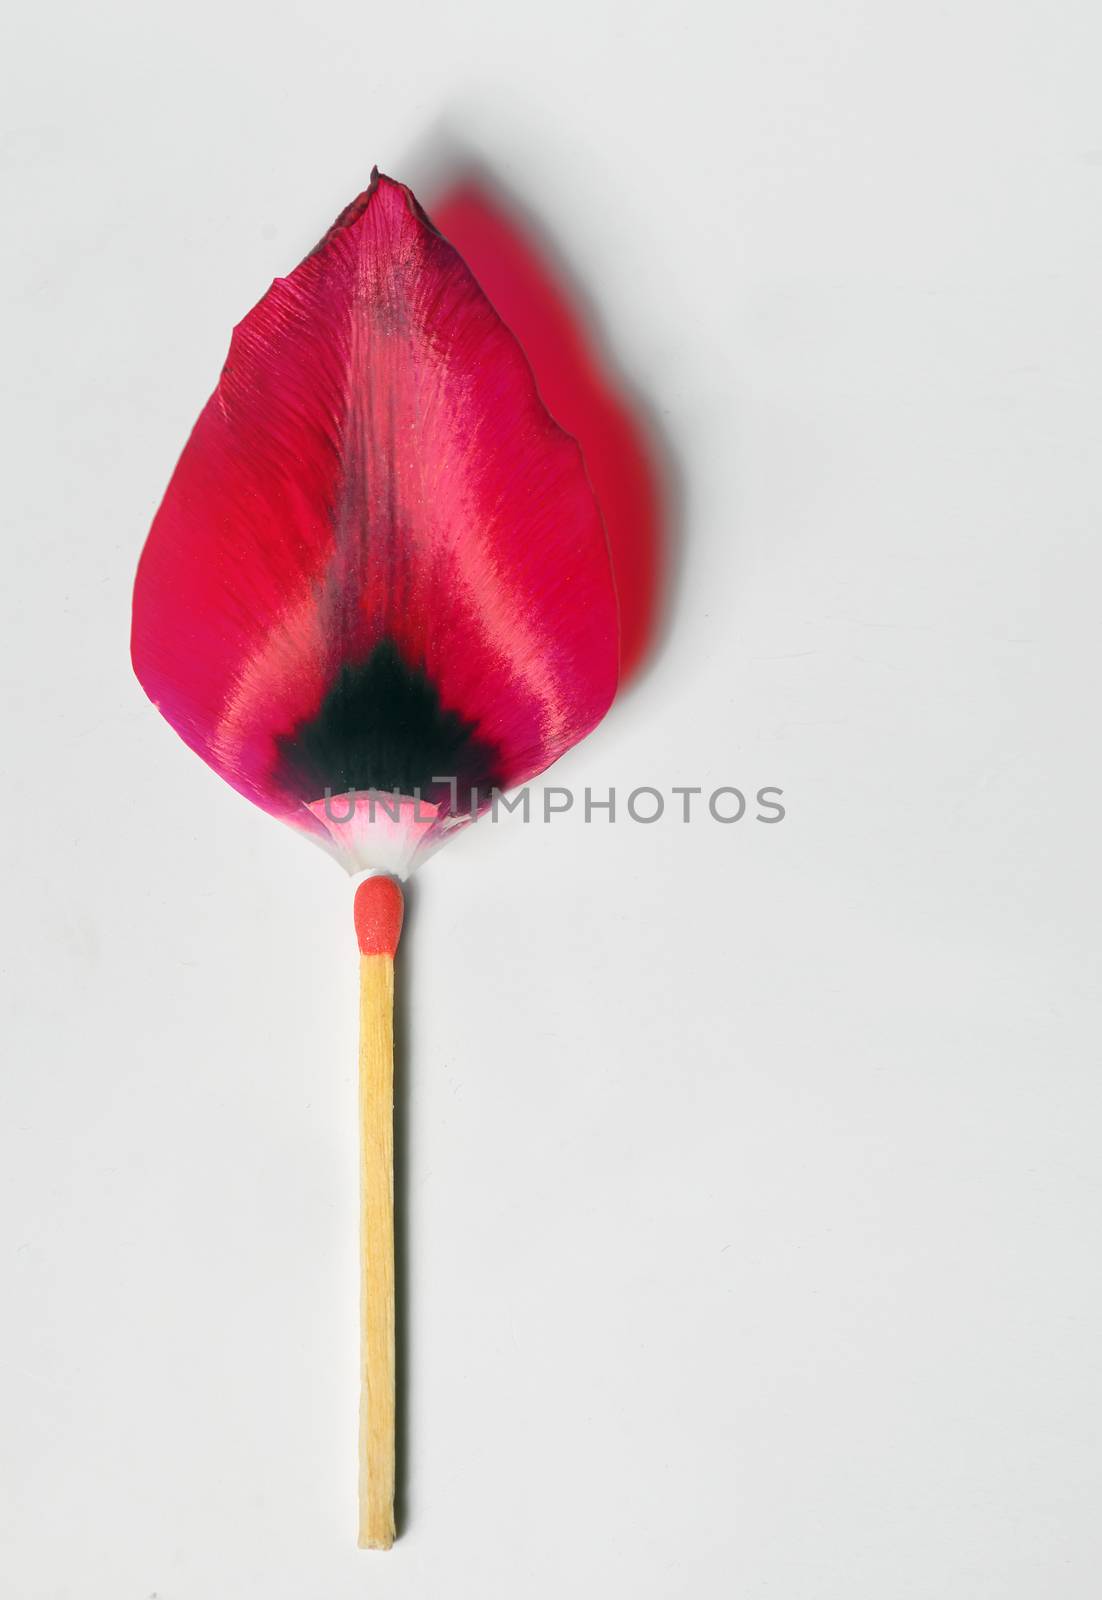 Burning match from tulip leaf concept